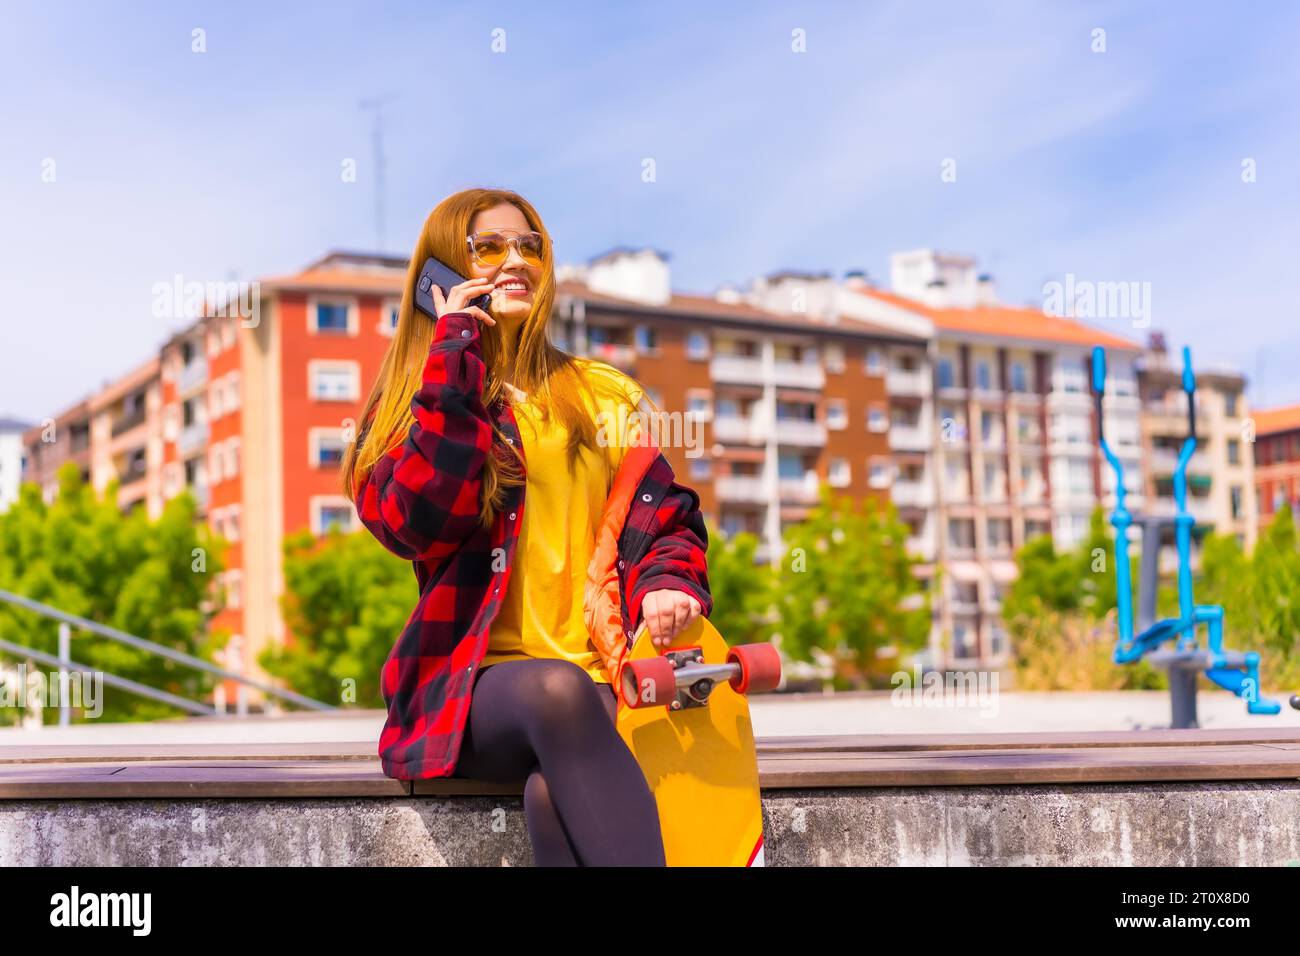 Skater woman in a yellow t-shirt, red plaid shirt and sunglasses, sitting with skateboard in the city, smiling calling with the phone Stock Photo